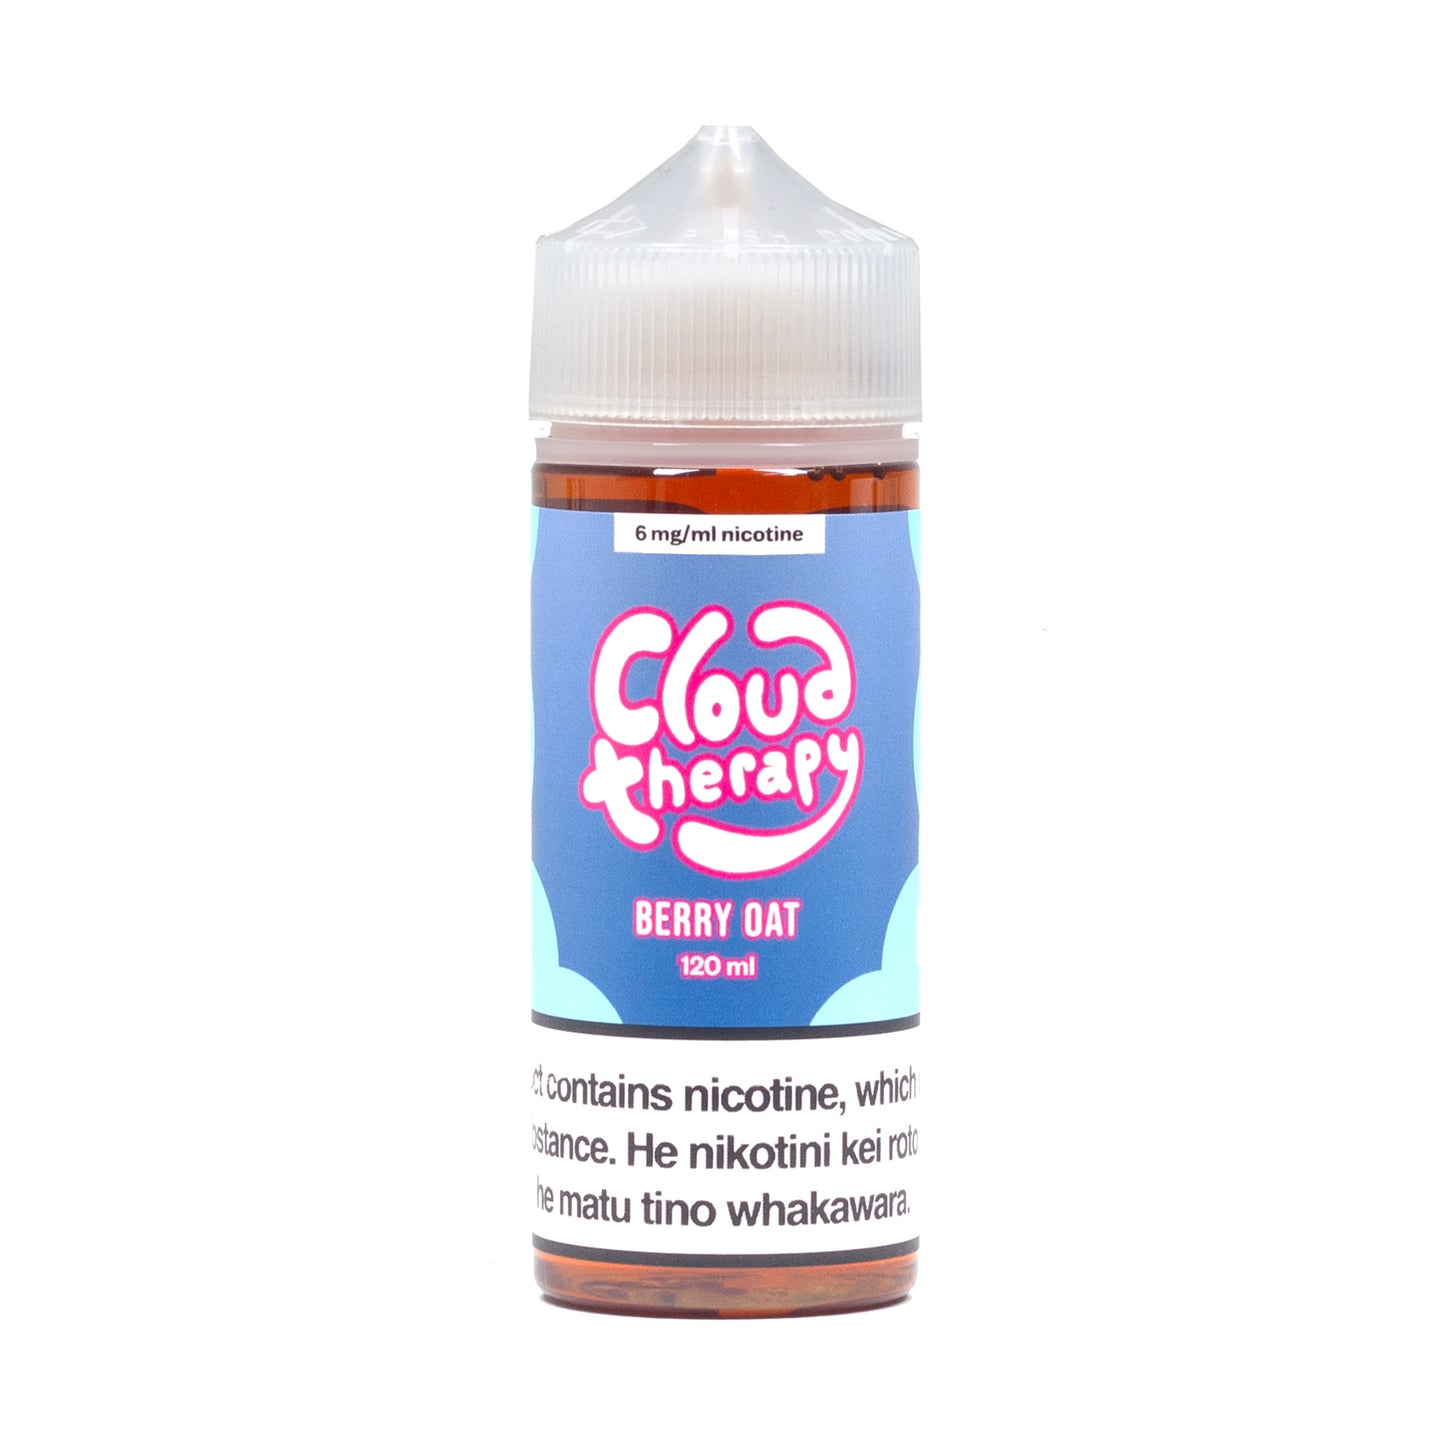 Cloud Therapy - Berry Oat (ex-Crunch Berry Remedy) - 120ml